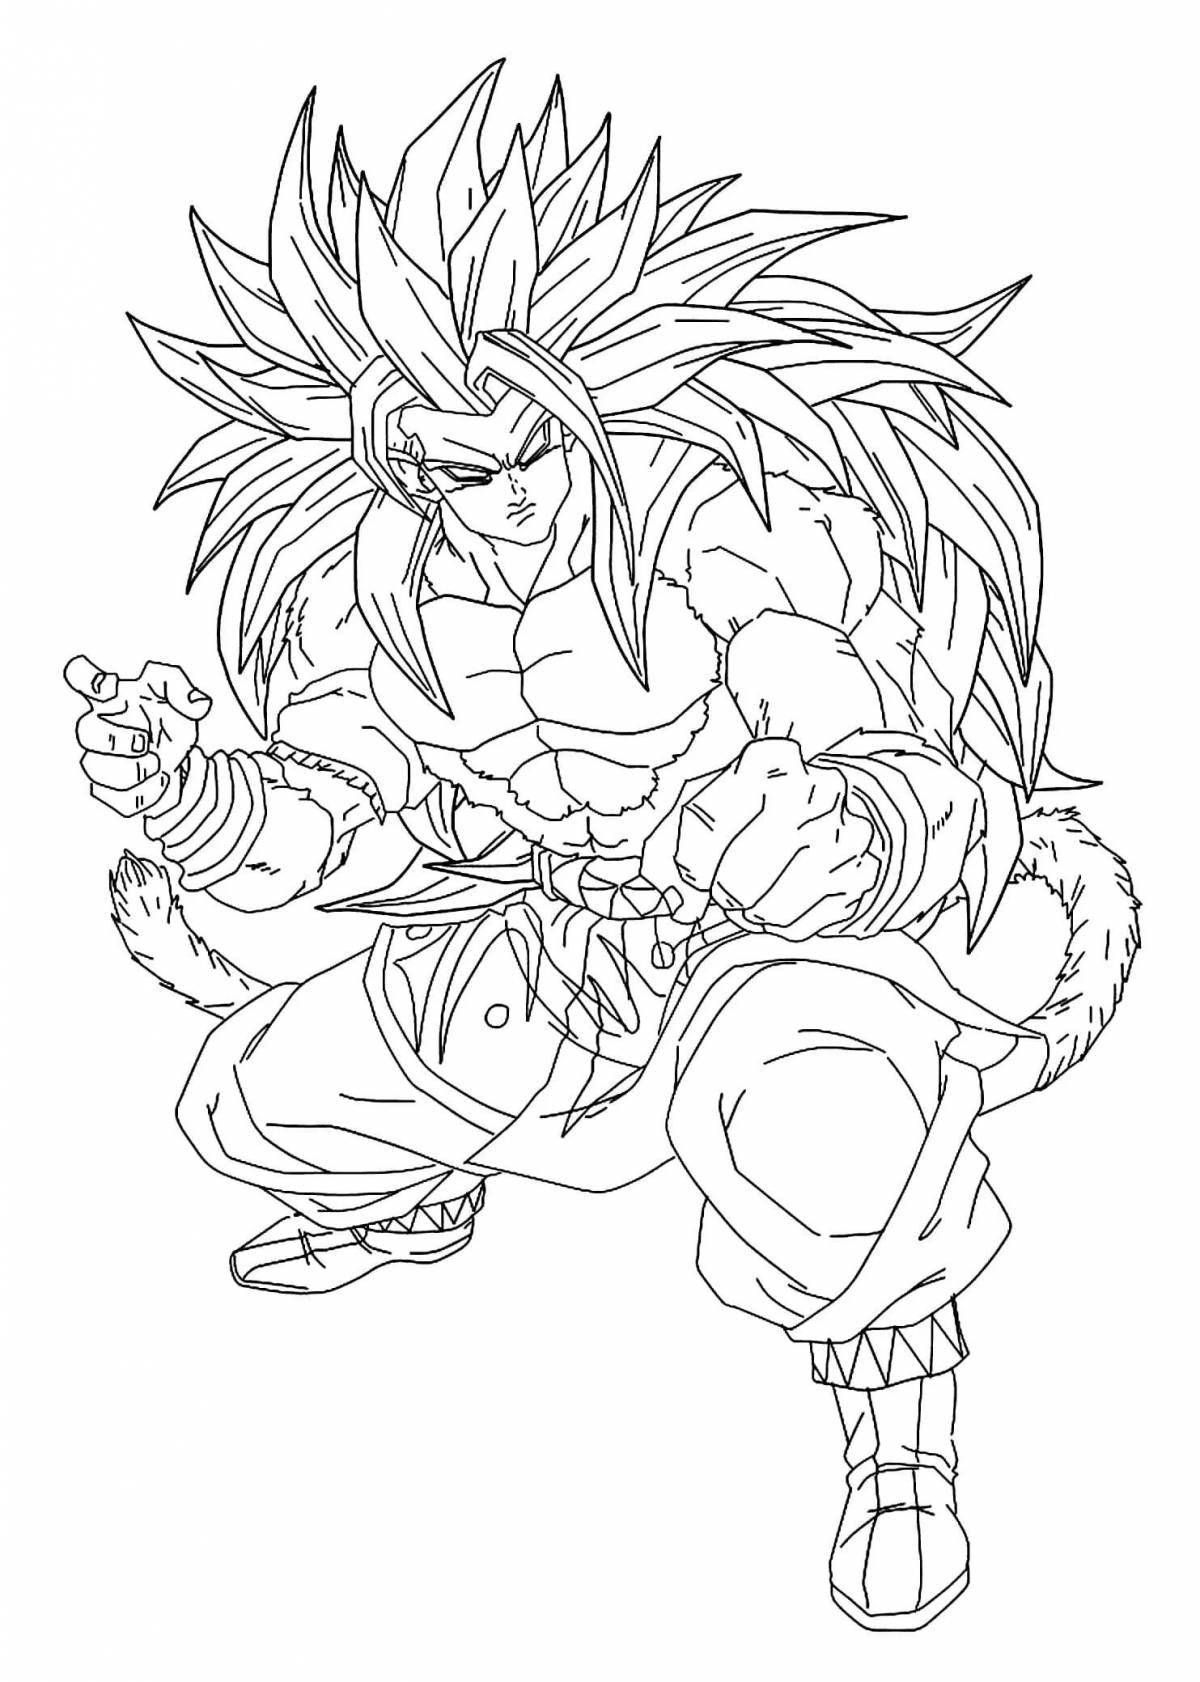 Awesome goku coloring page